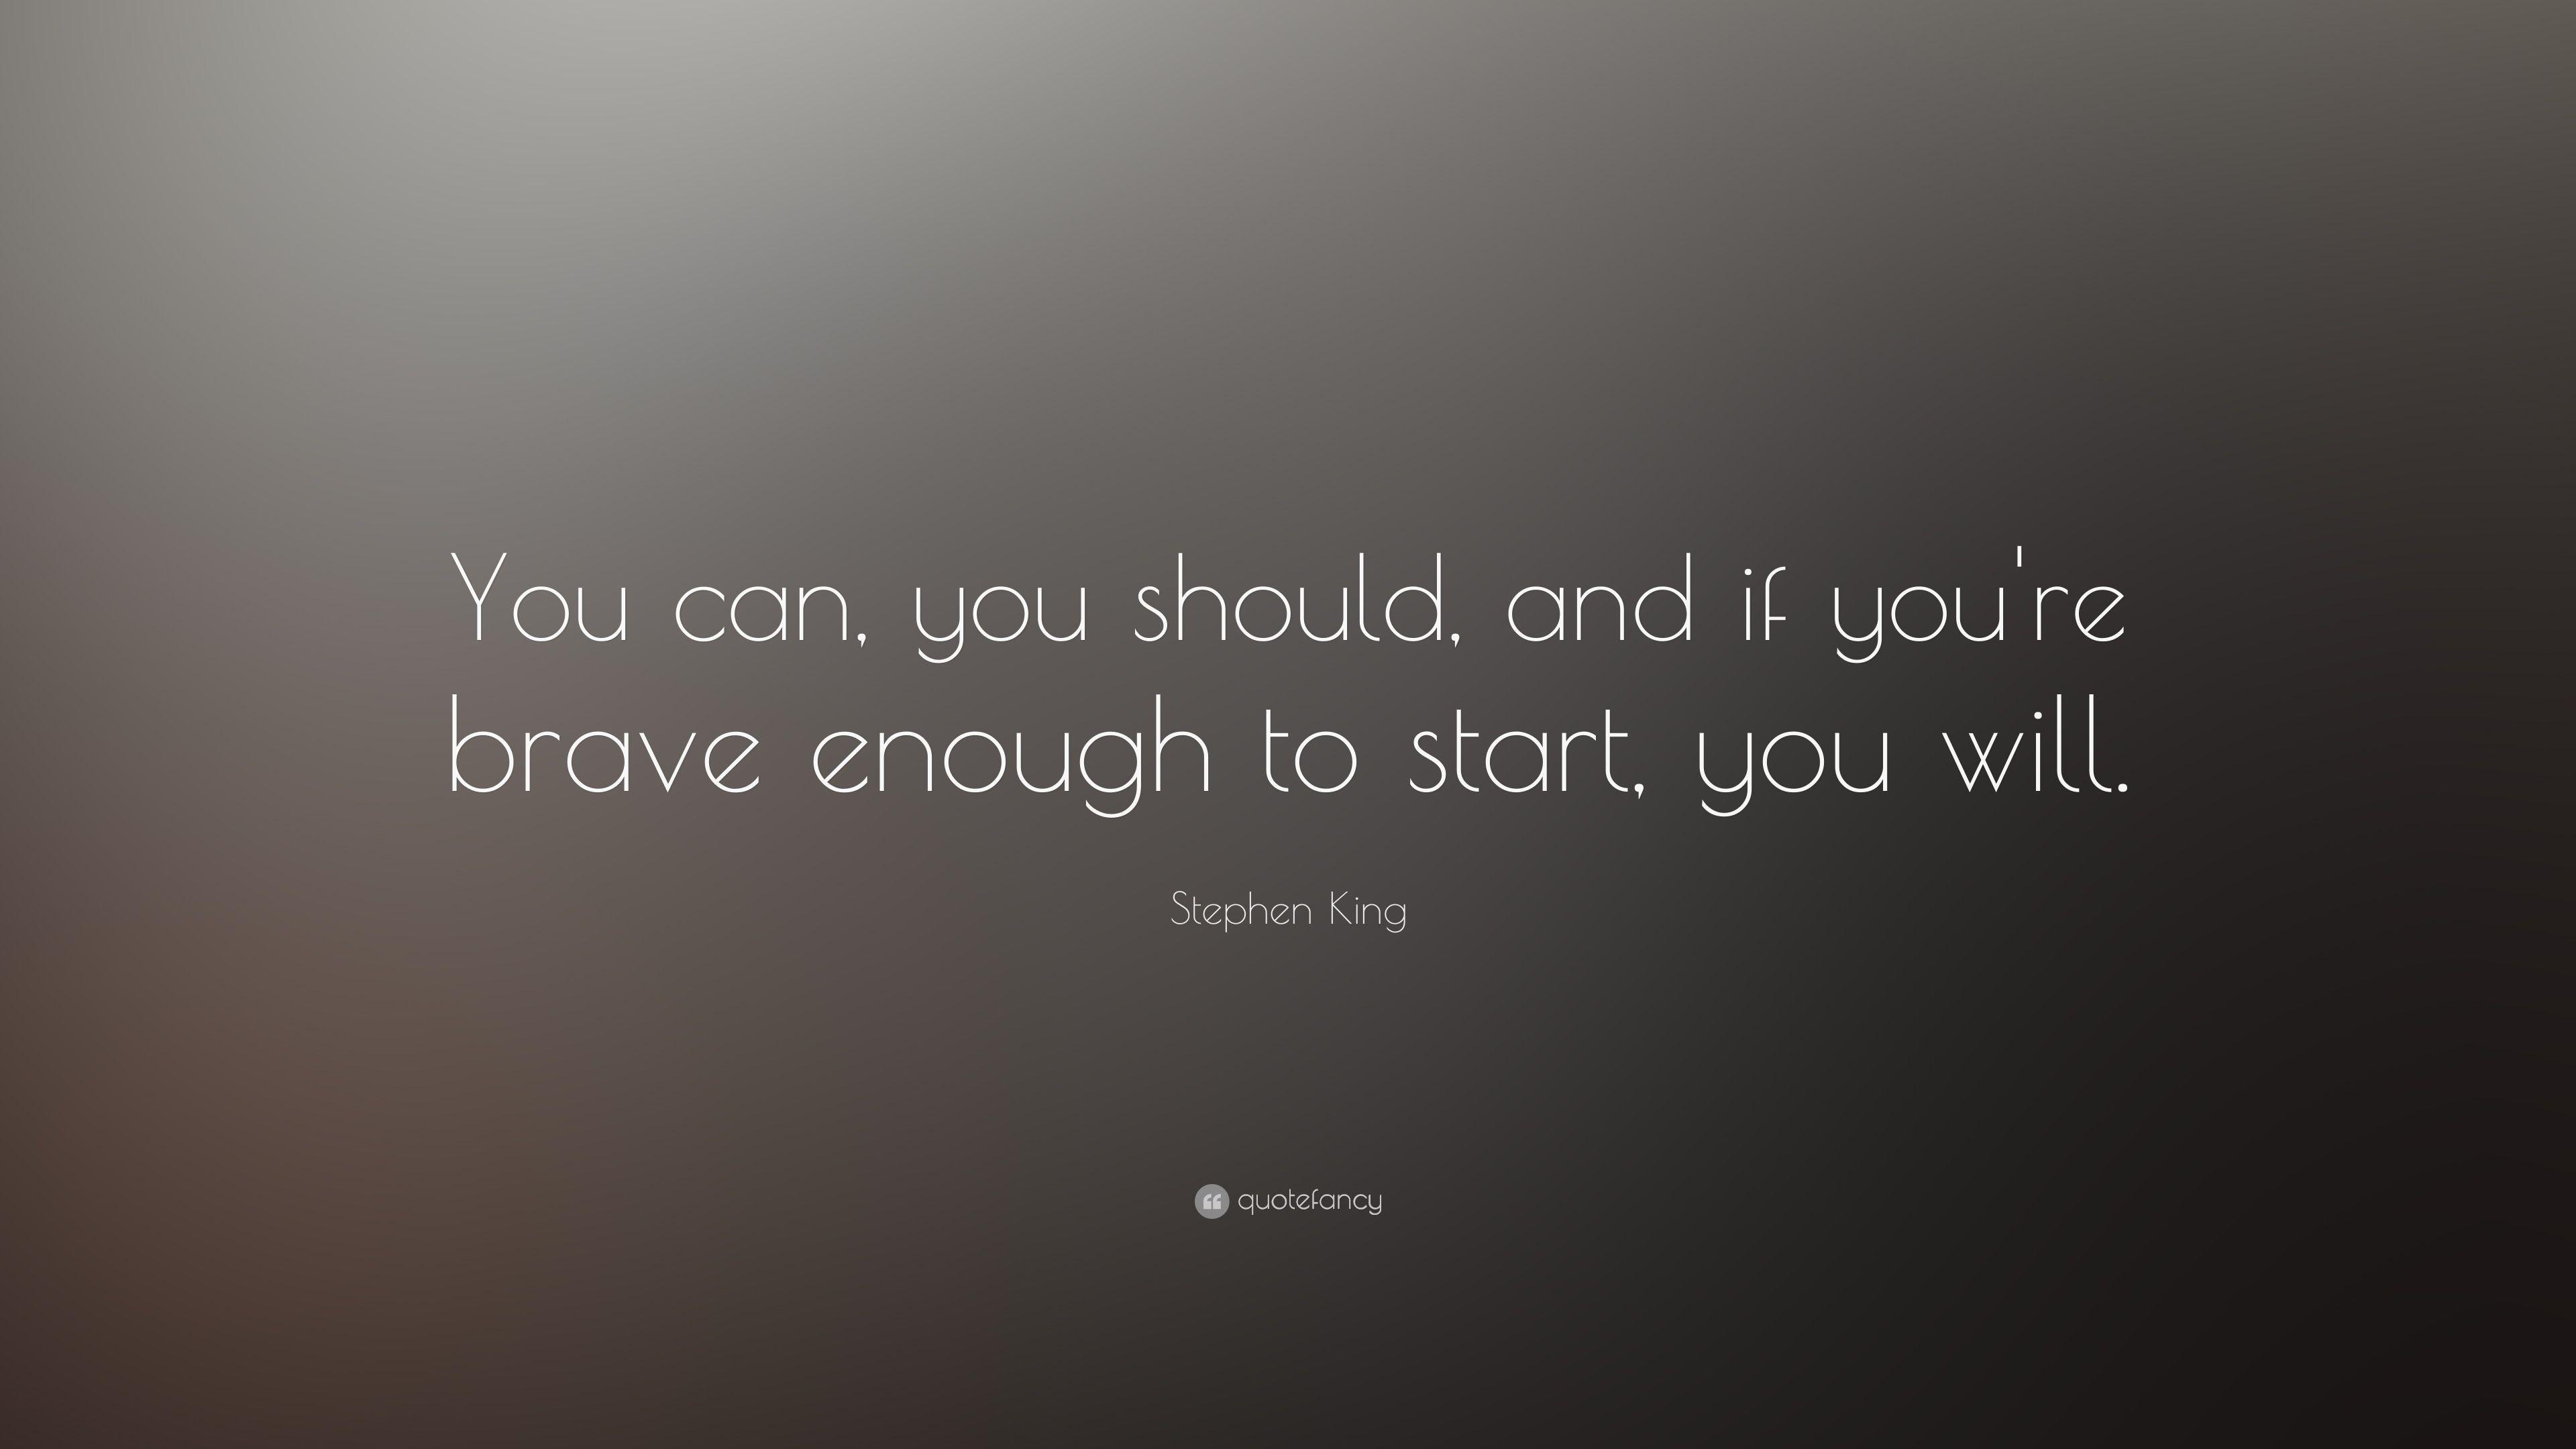 Stephen King Quote: “You can, you should, and if you're brave